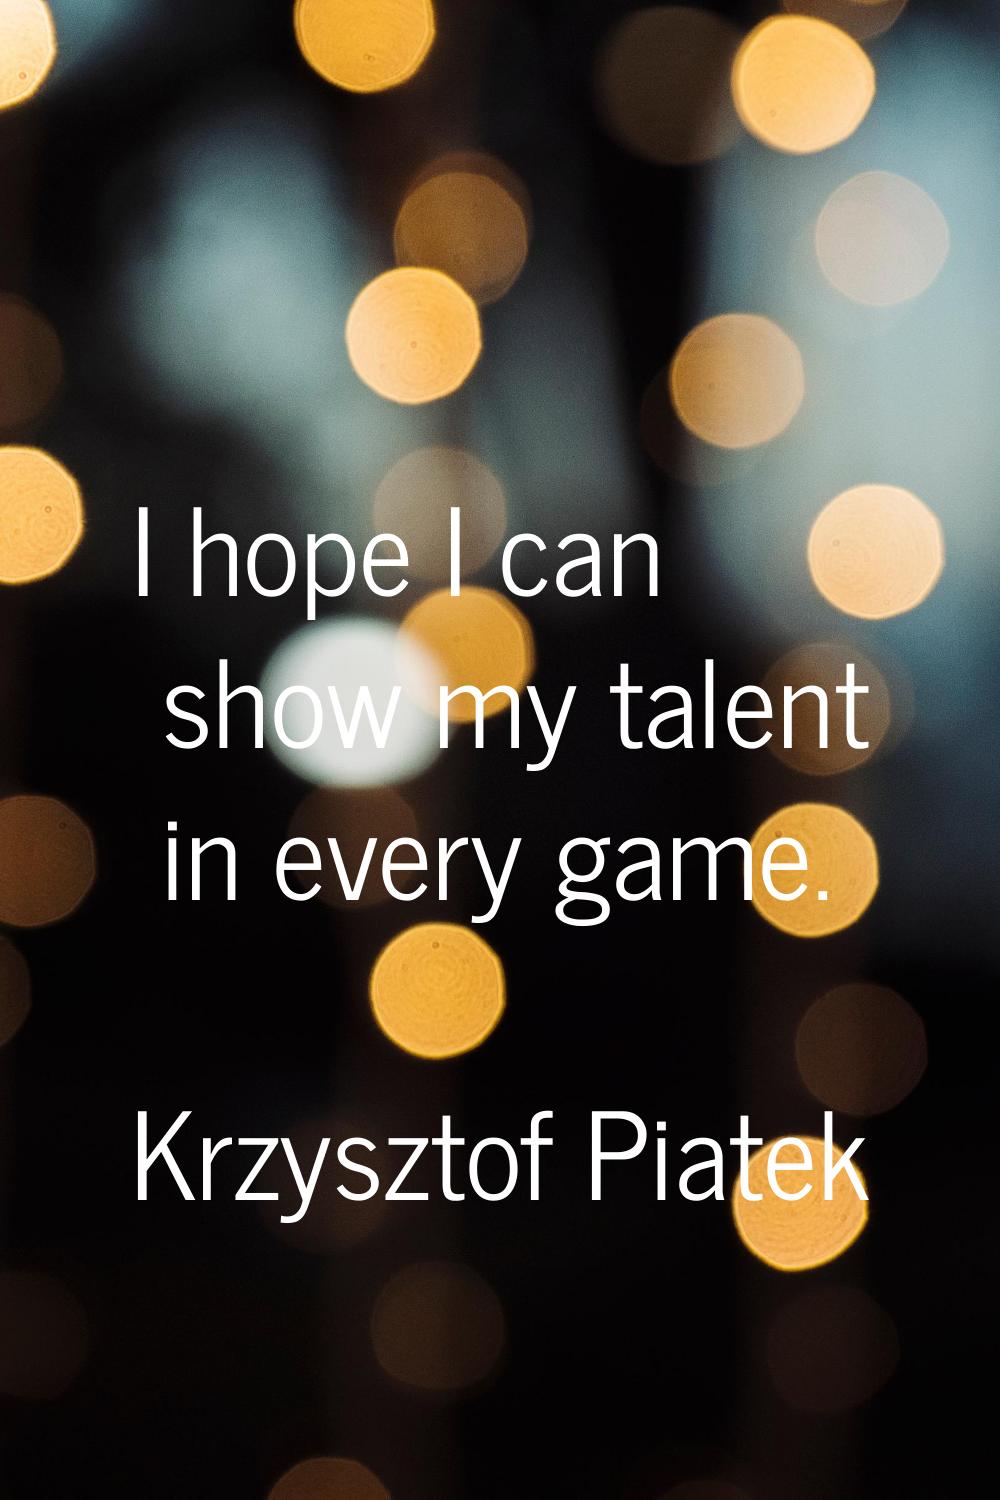 I hope I can show my talent in every game.